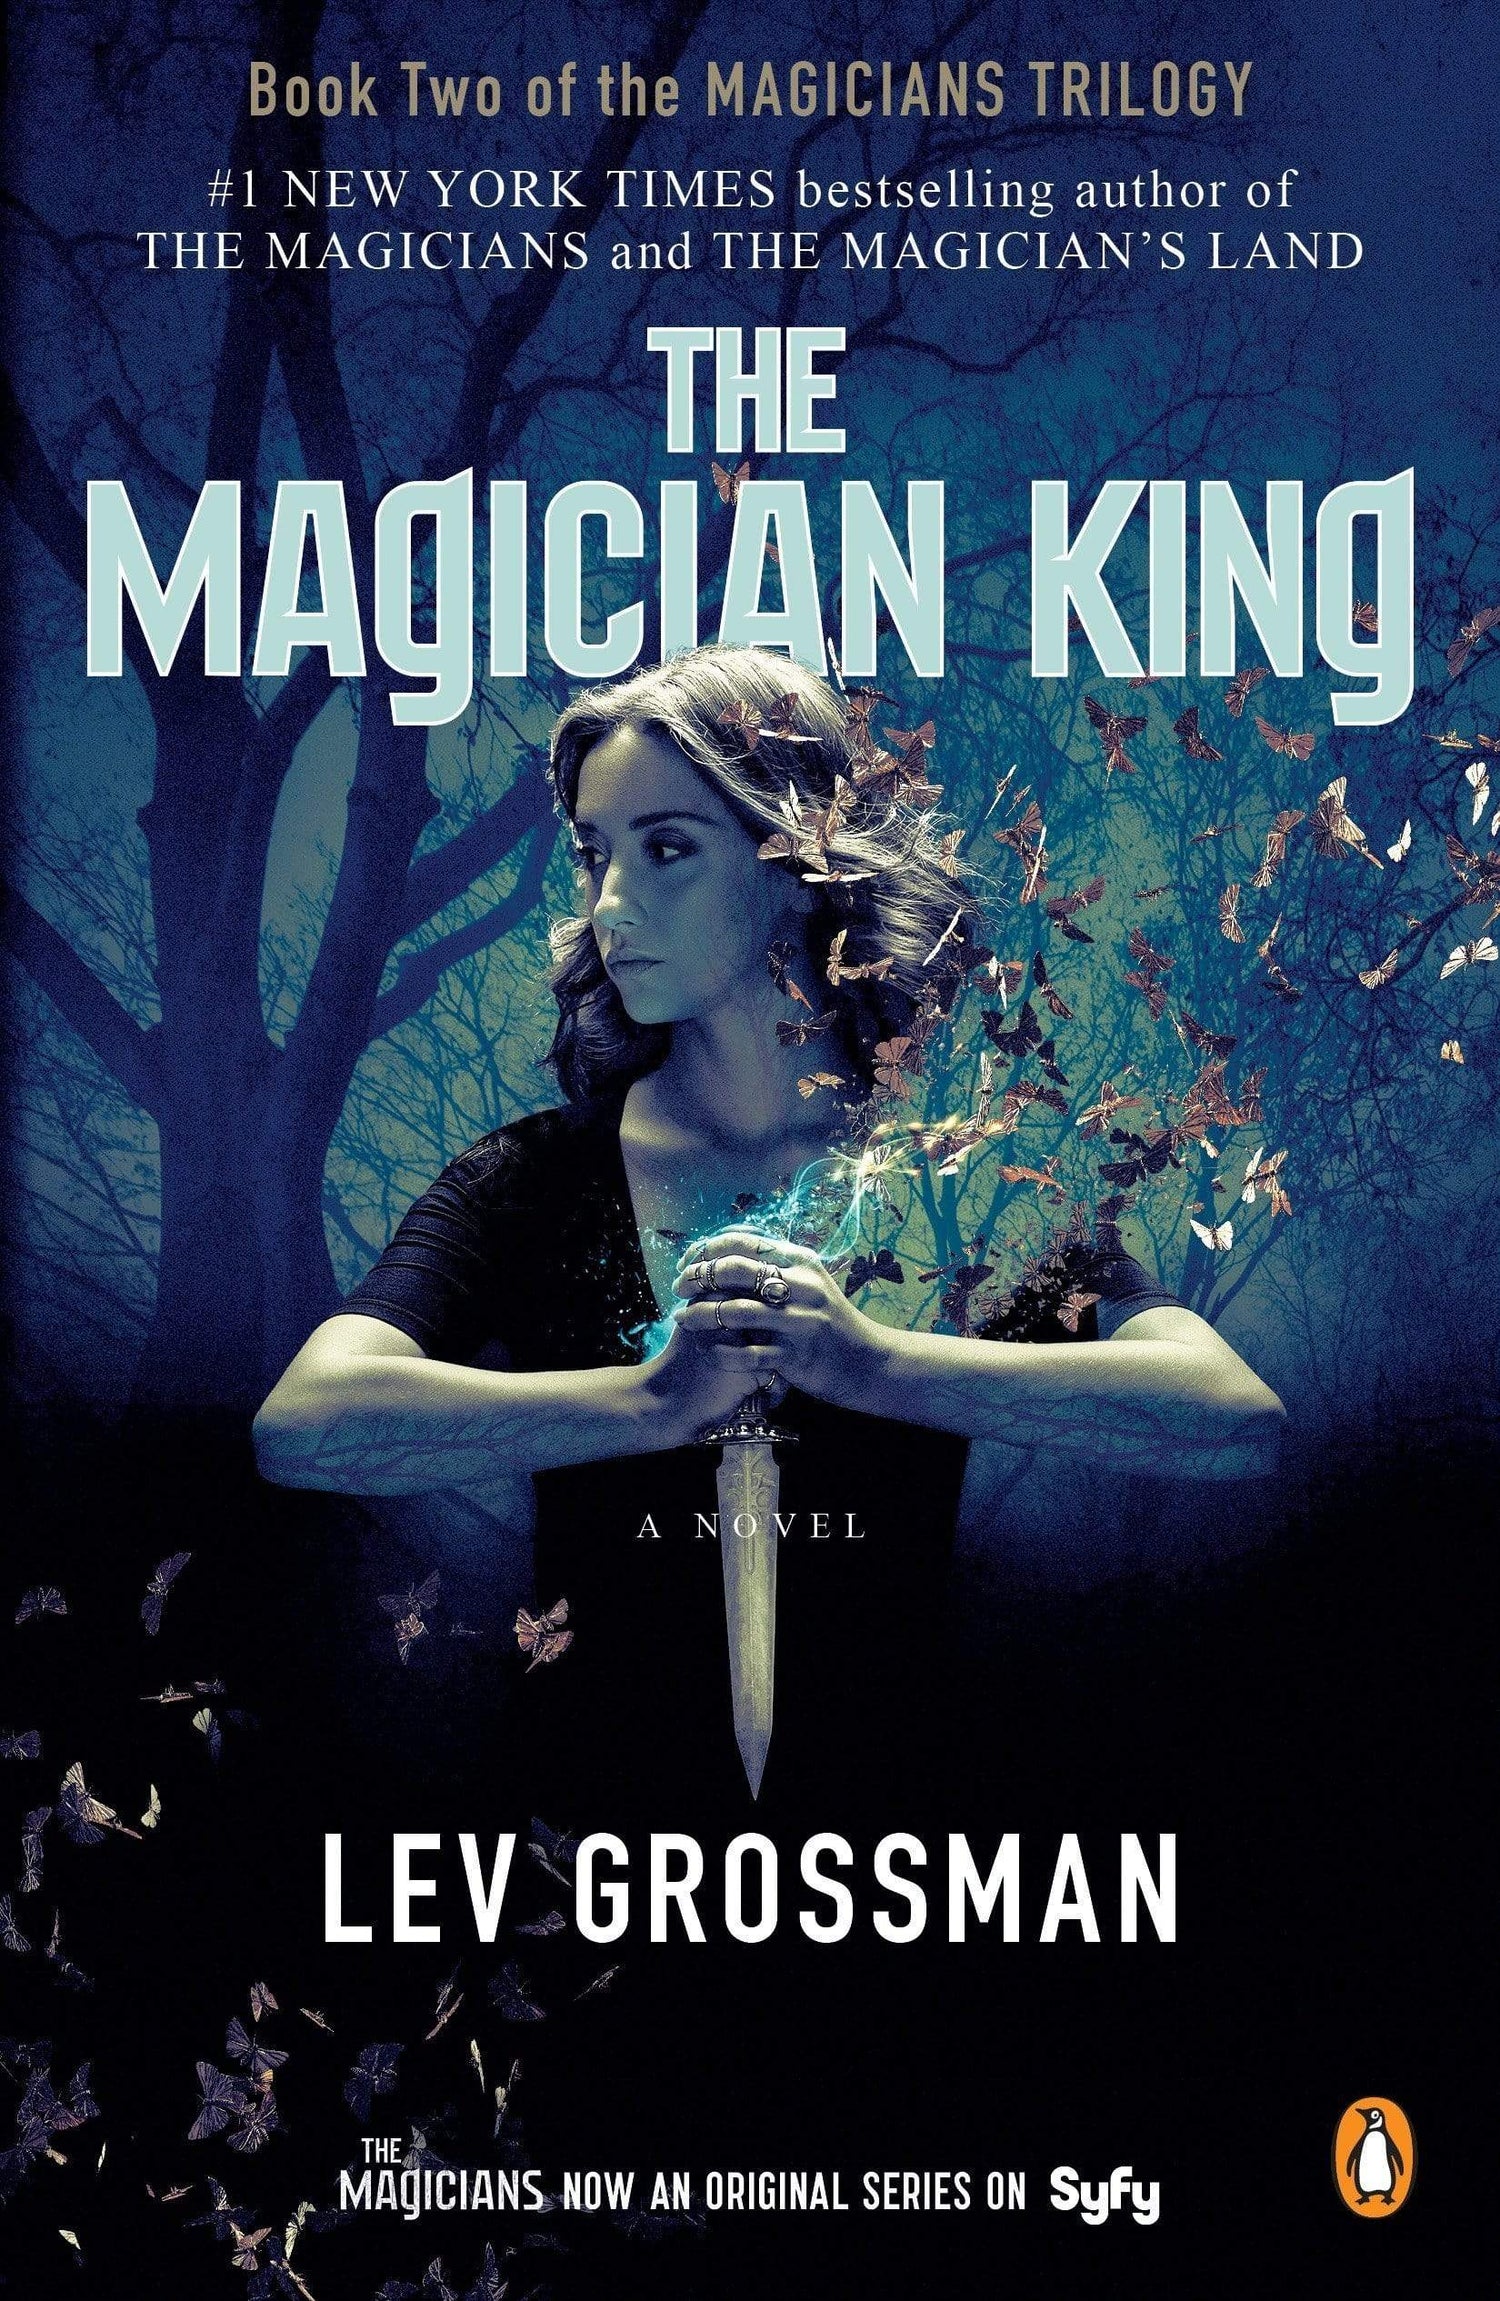 THE MAGICIAN KING: A NOVEL (TV TIE-IN) (MAGICIANS TRILOGY)